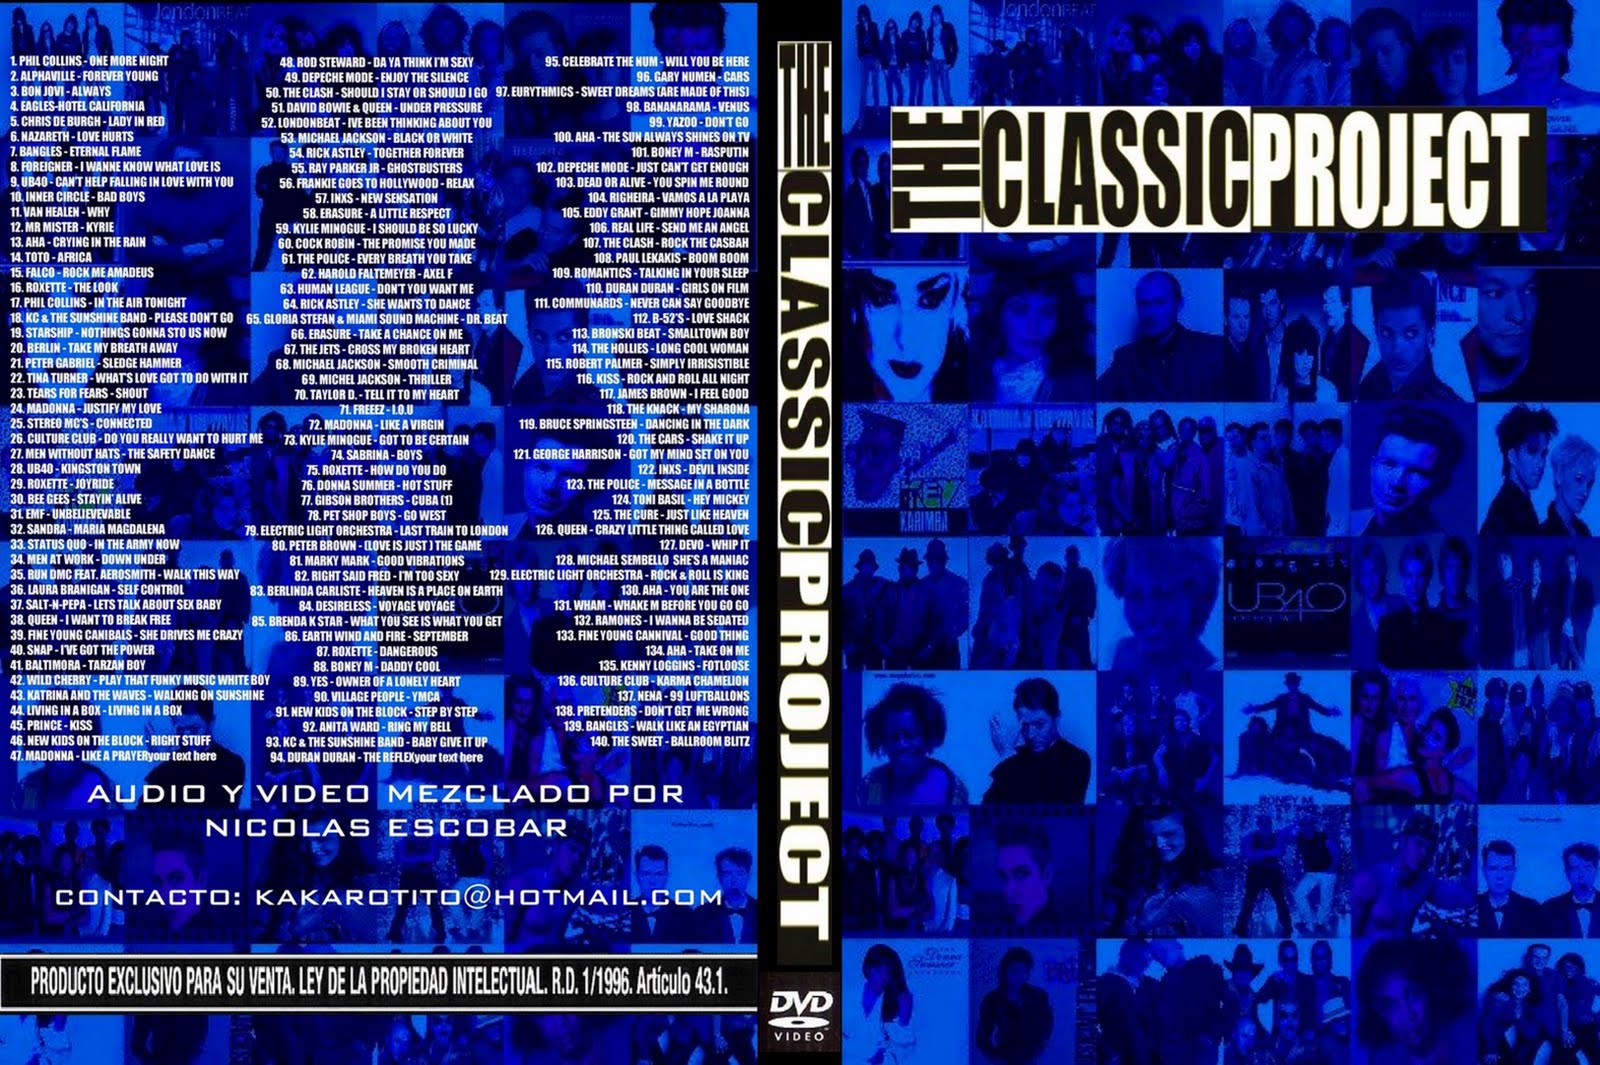 Classic Project Reloaded Vol.1 (2008) [DVD-R.5]